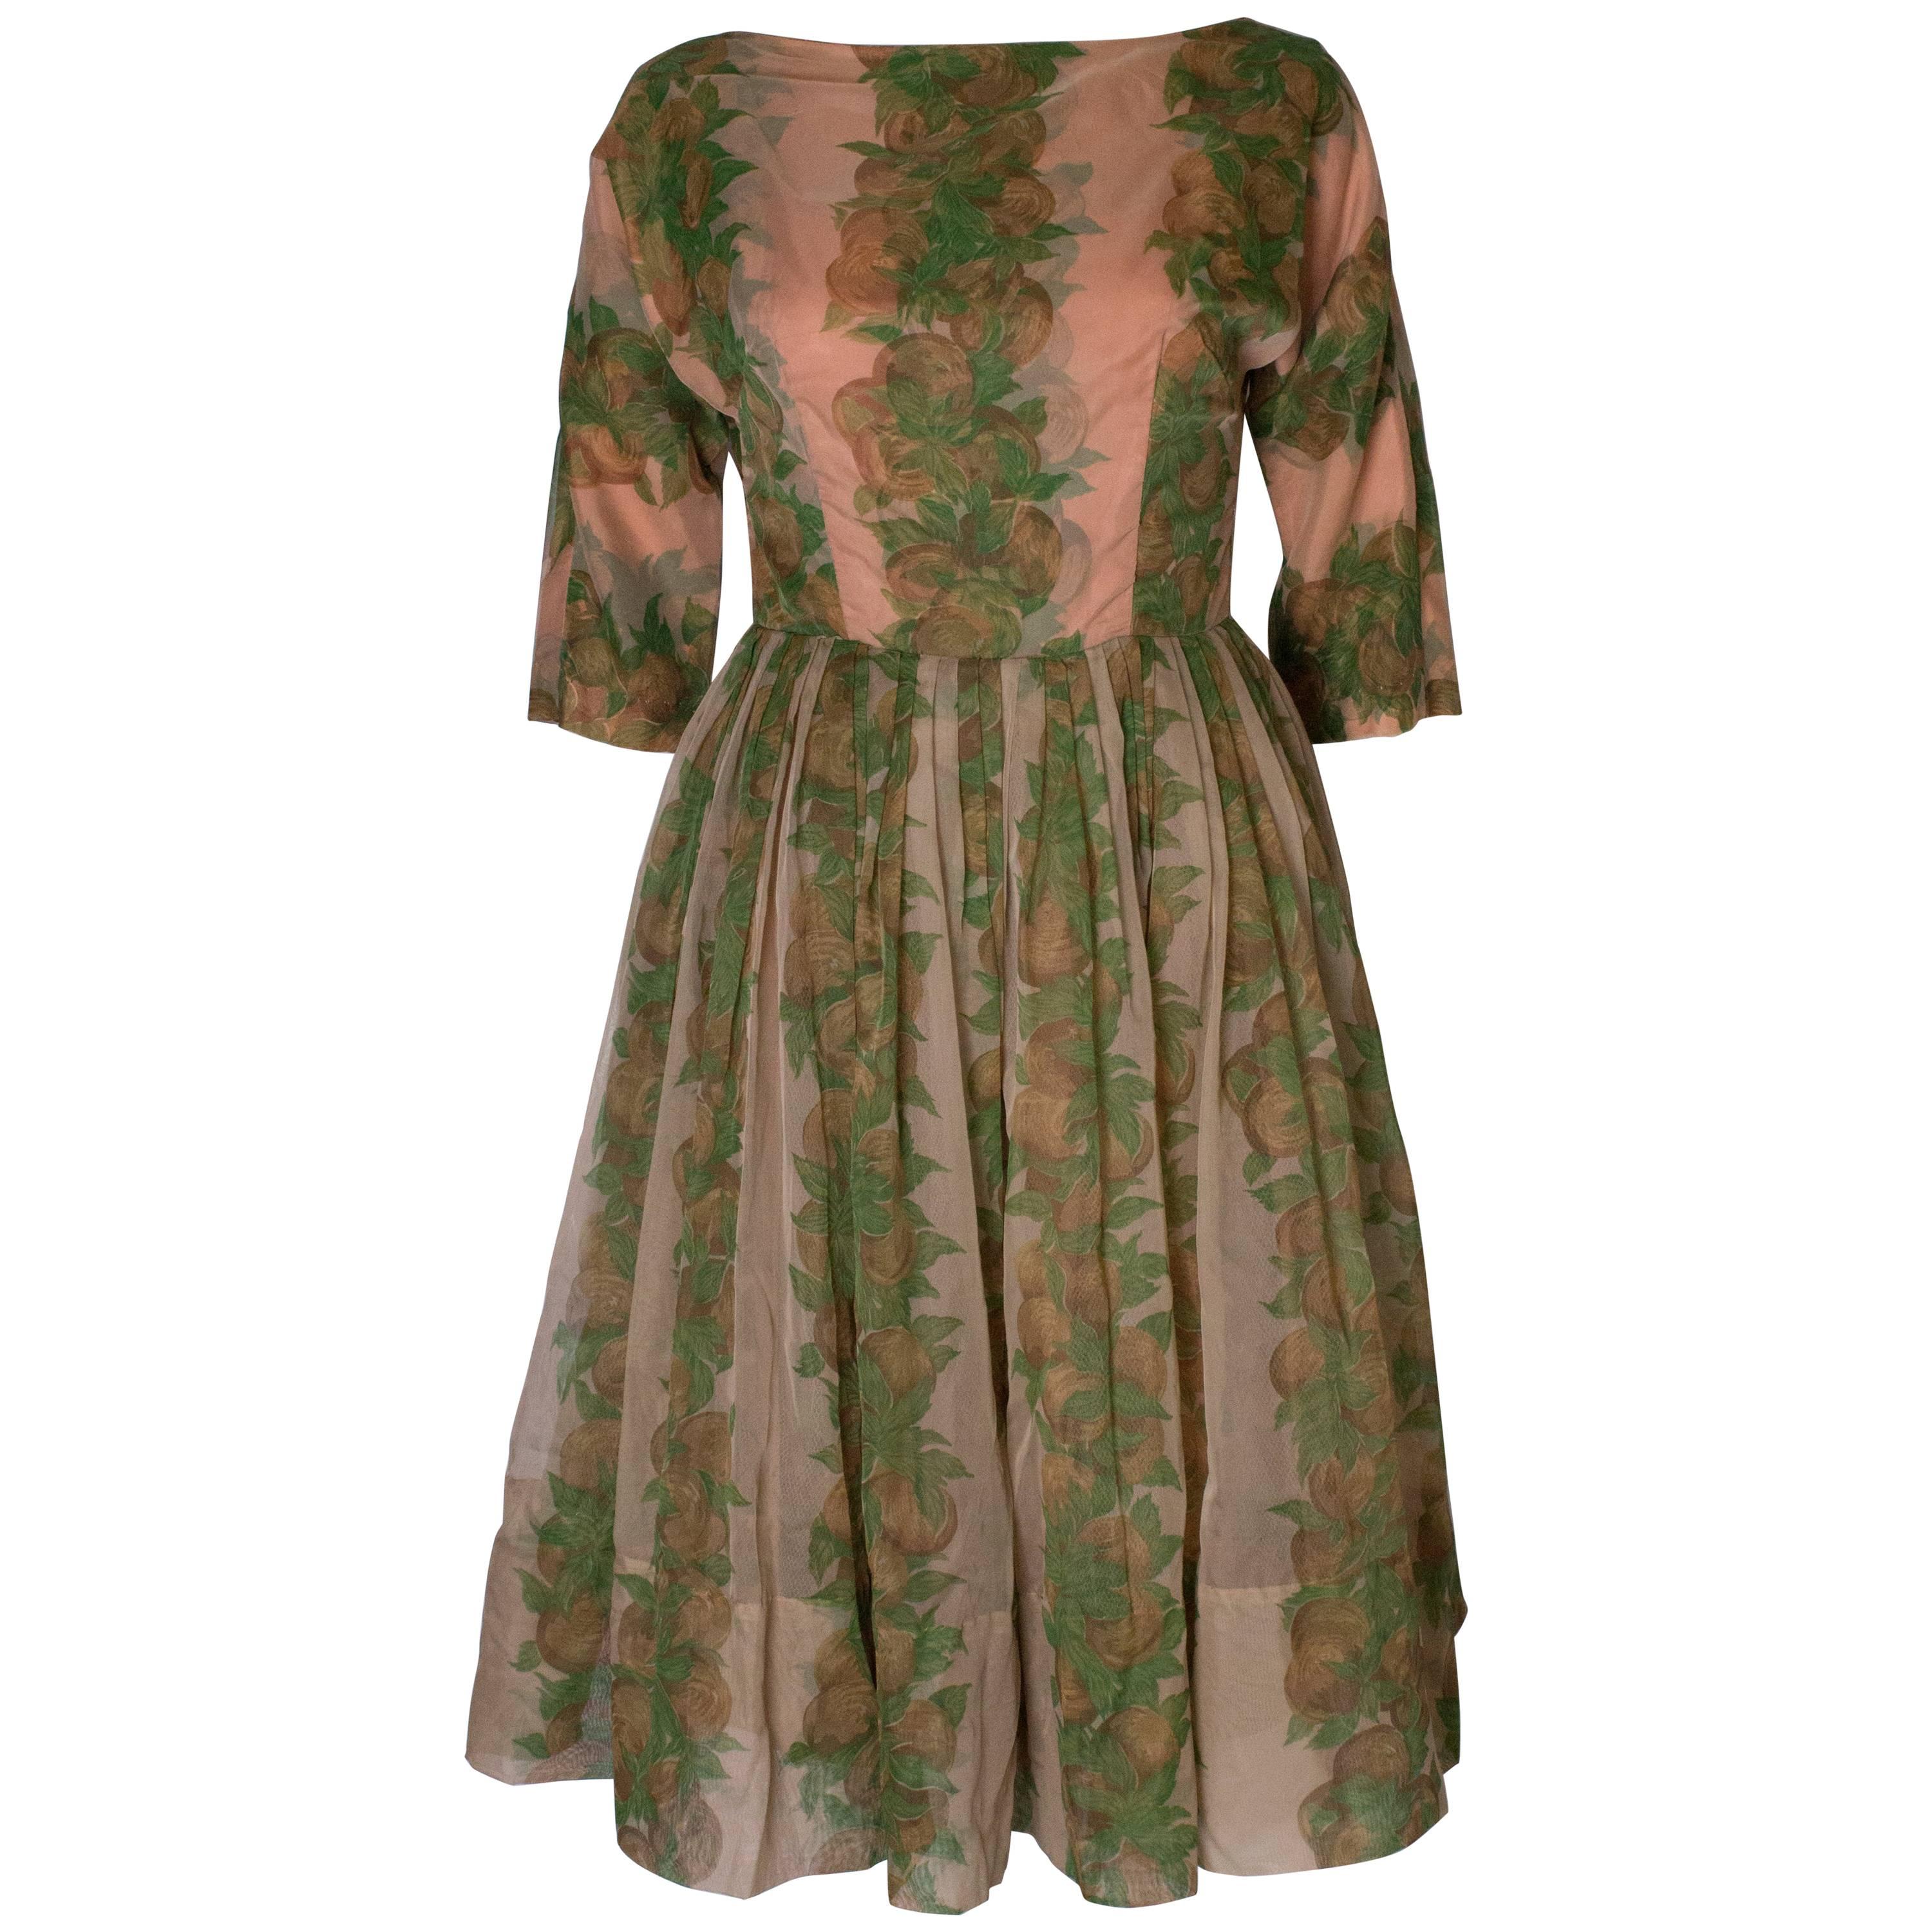 A Vintage 1950s Apricot, Green and Brown print swing cinch party dress